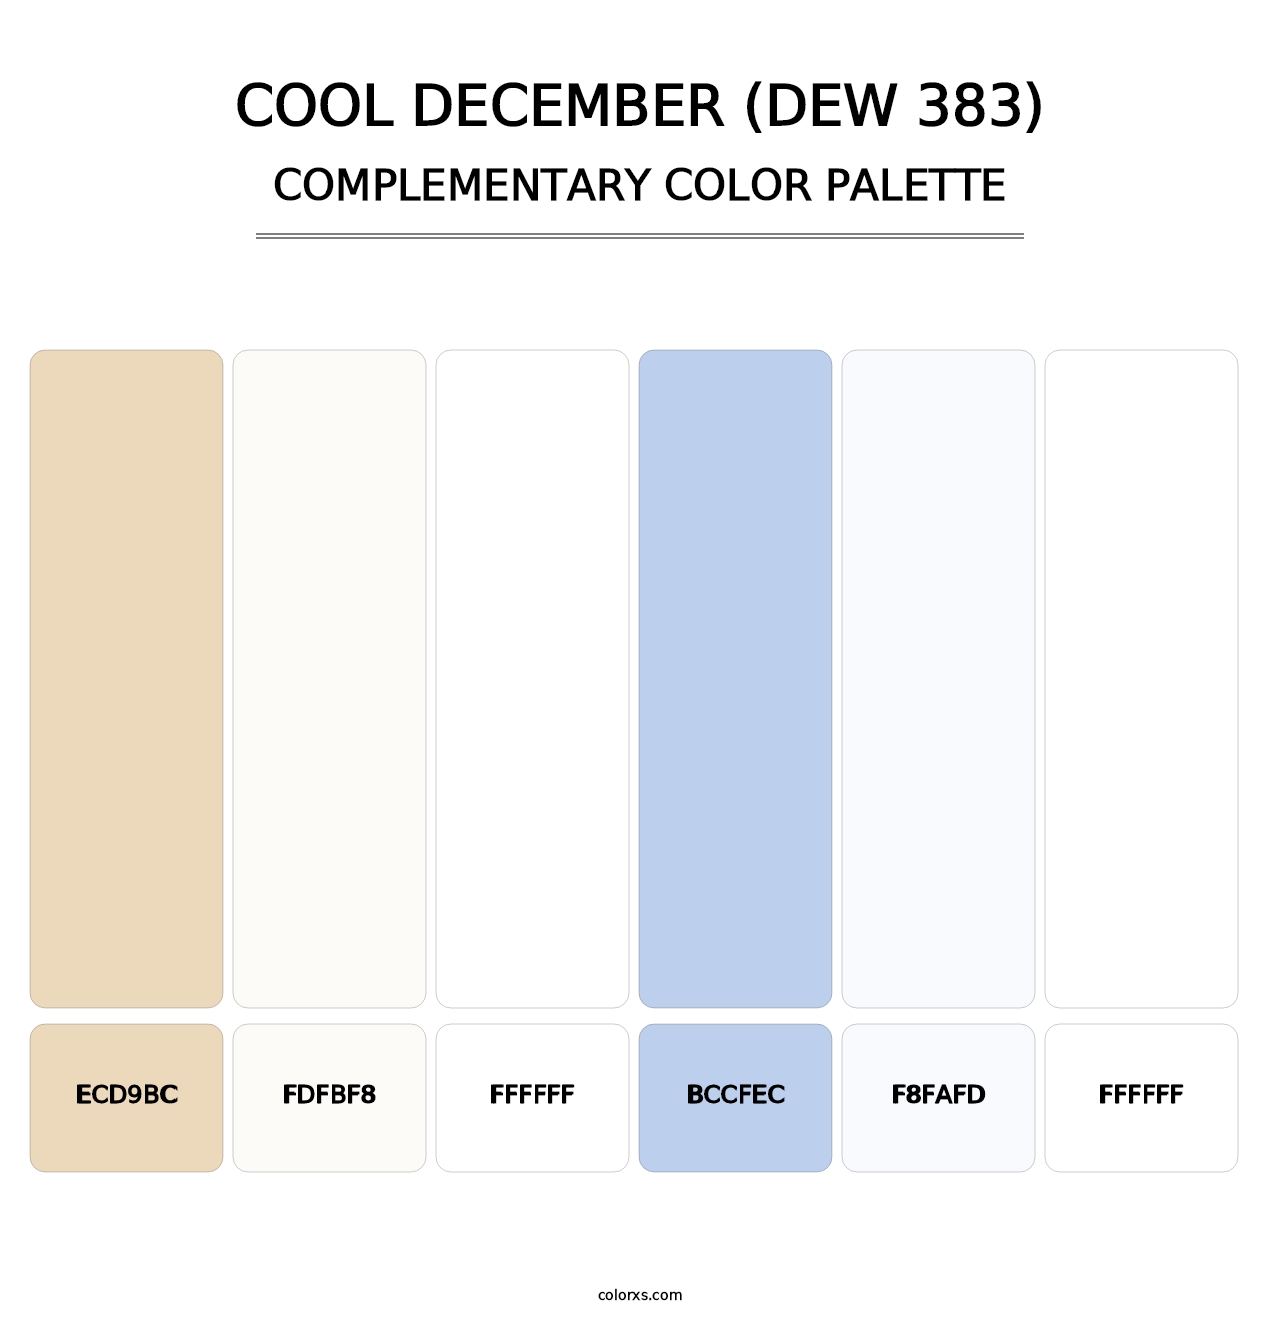 Cool December (DEW 383) - Complementary Color Palette